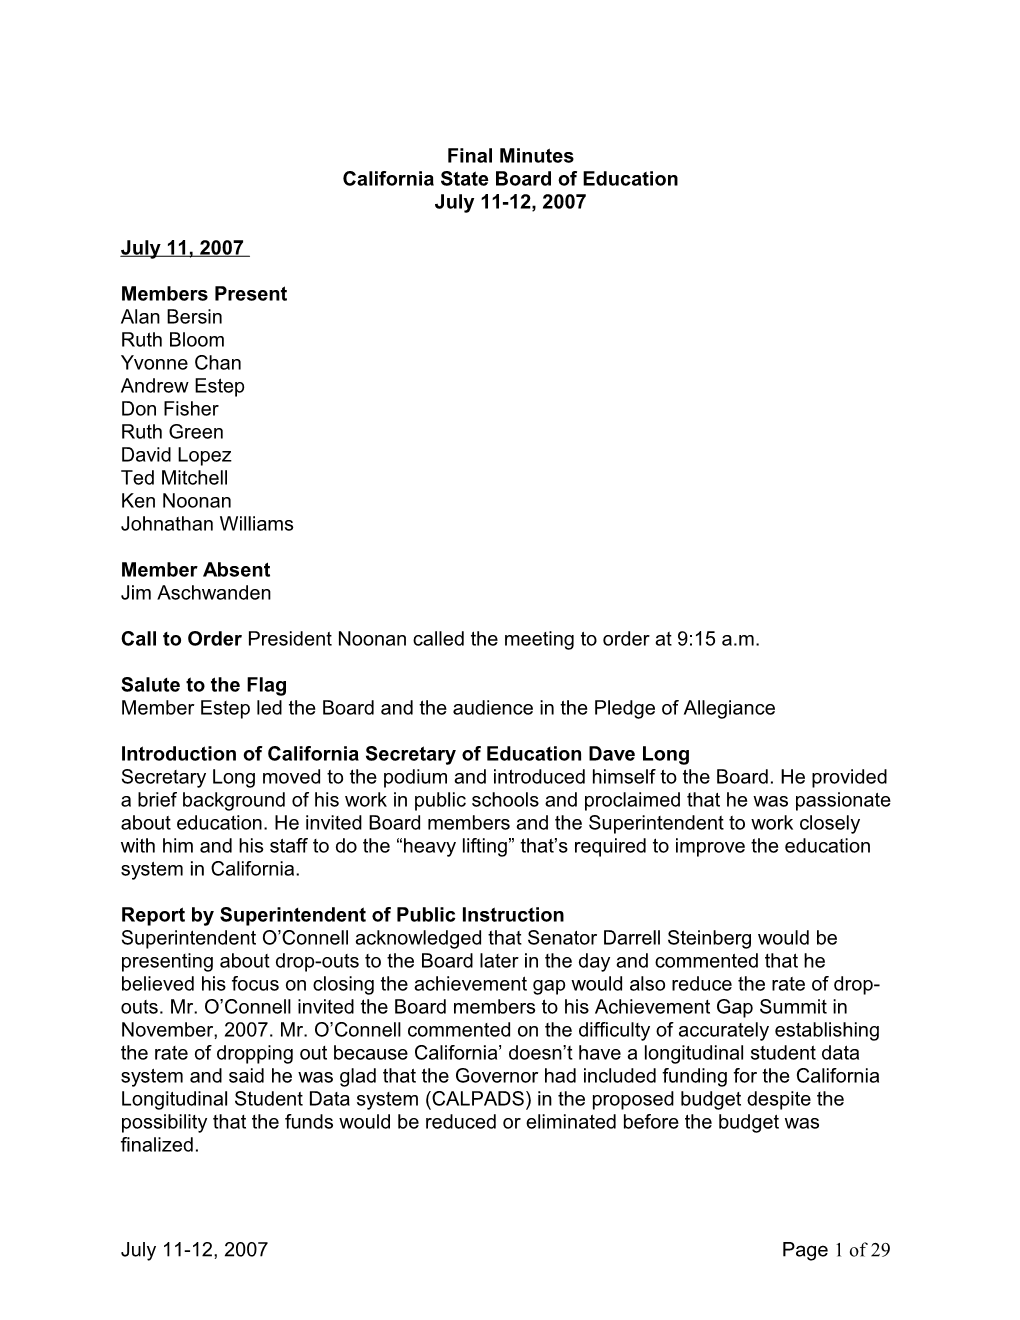 Final Minutes July 11-12, 2007 - SBE Minutes (CA State Board of Education)